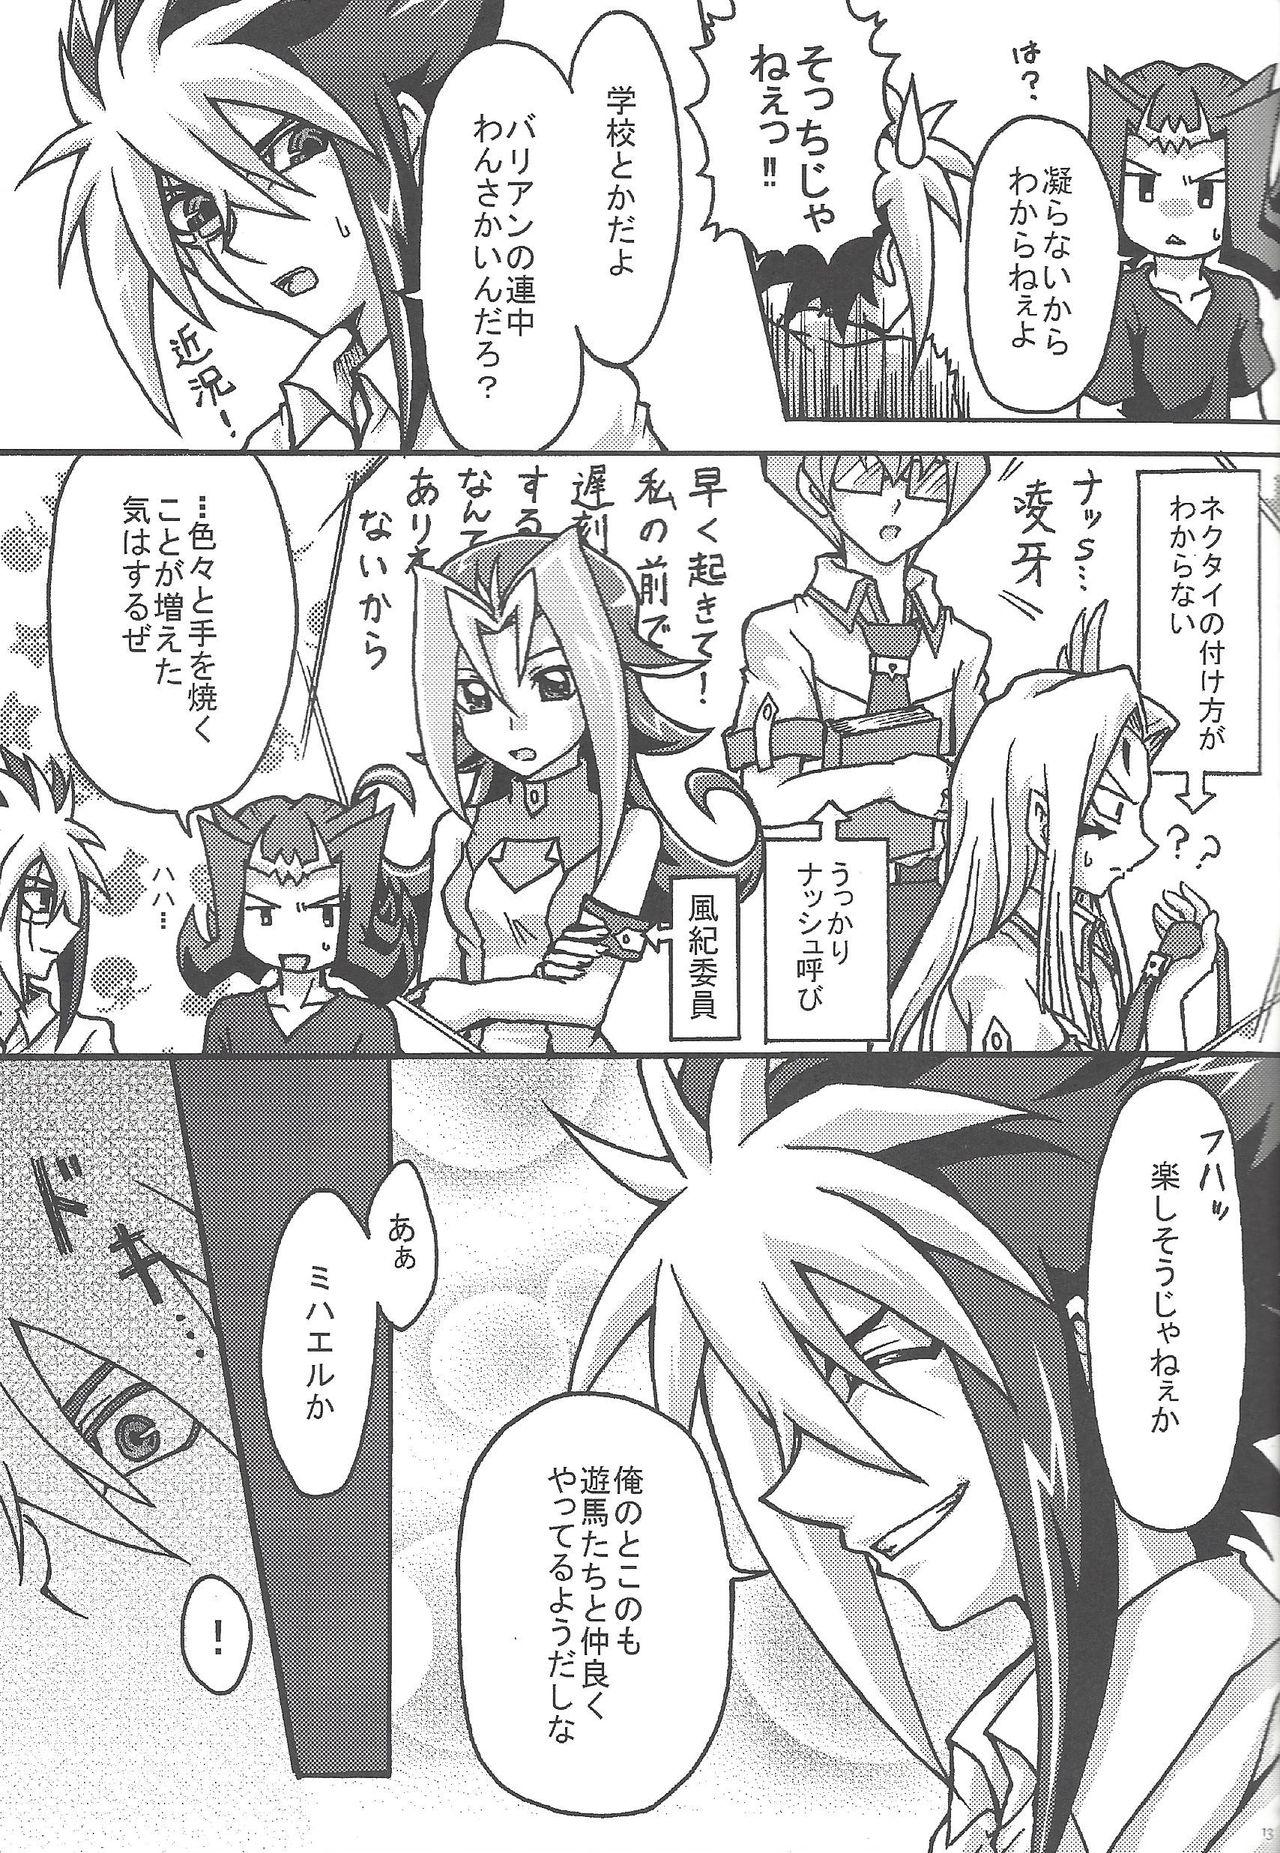 Longhair no credit service - Yu-gi-oh zexal Young Tits - Page 12